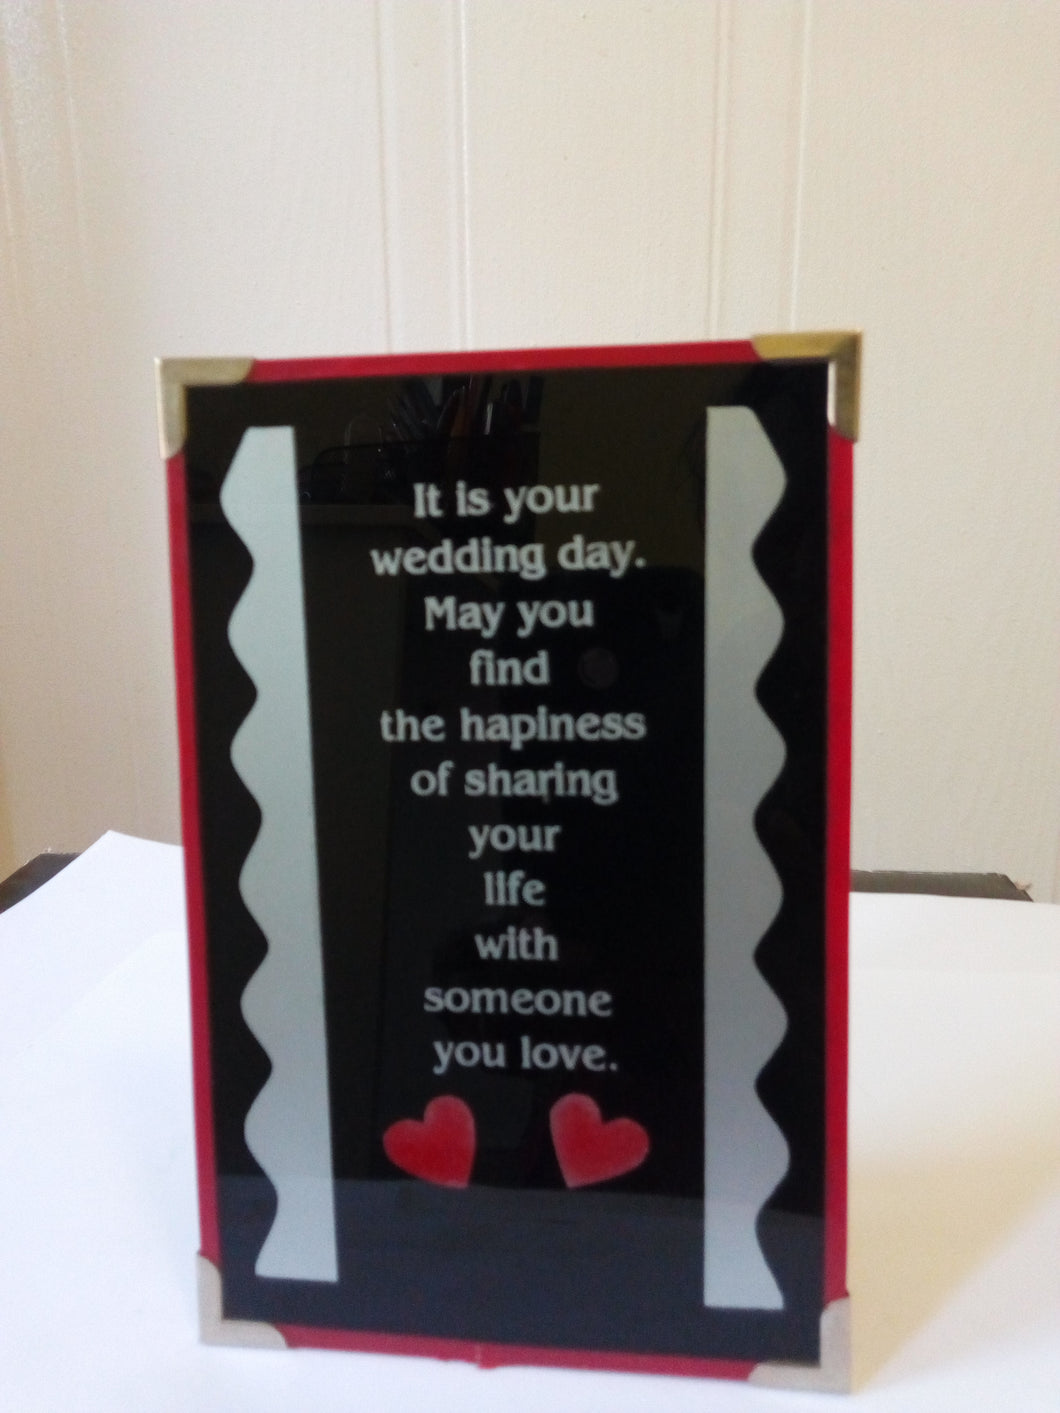 Christian Glass Message Plaque - It is your wedding day...